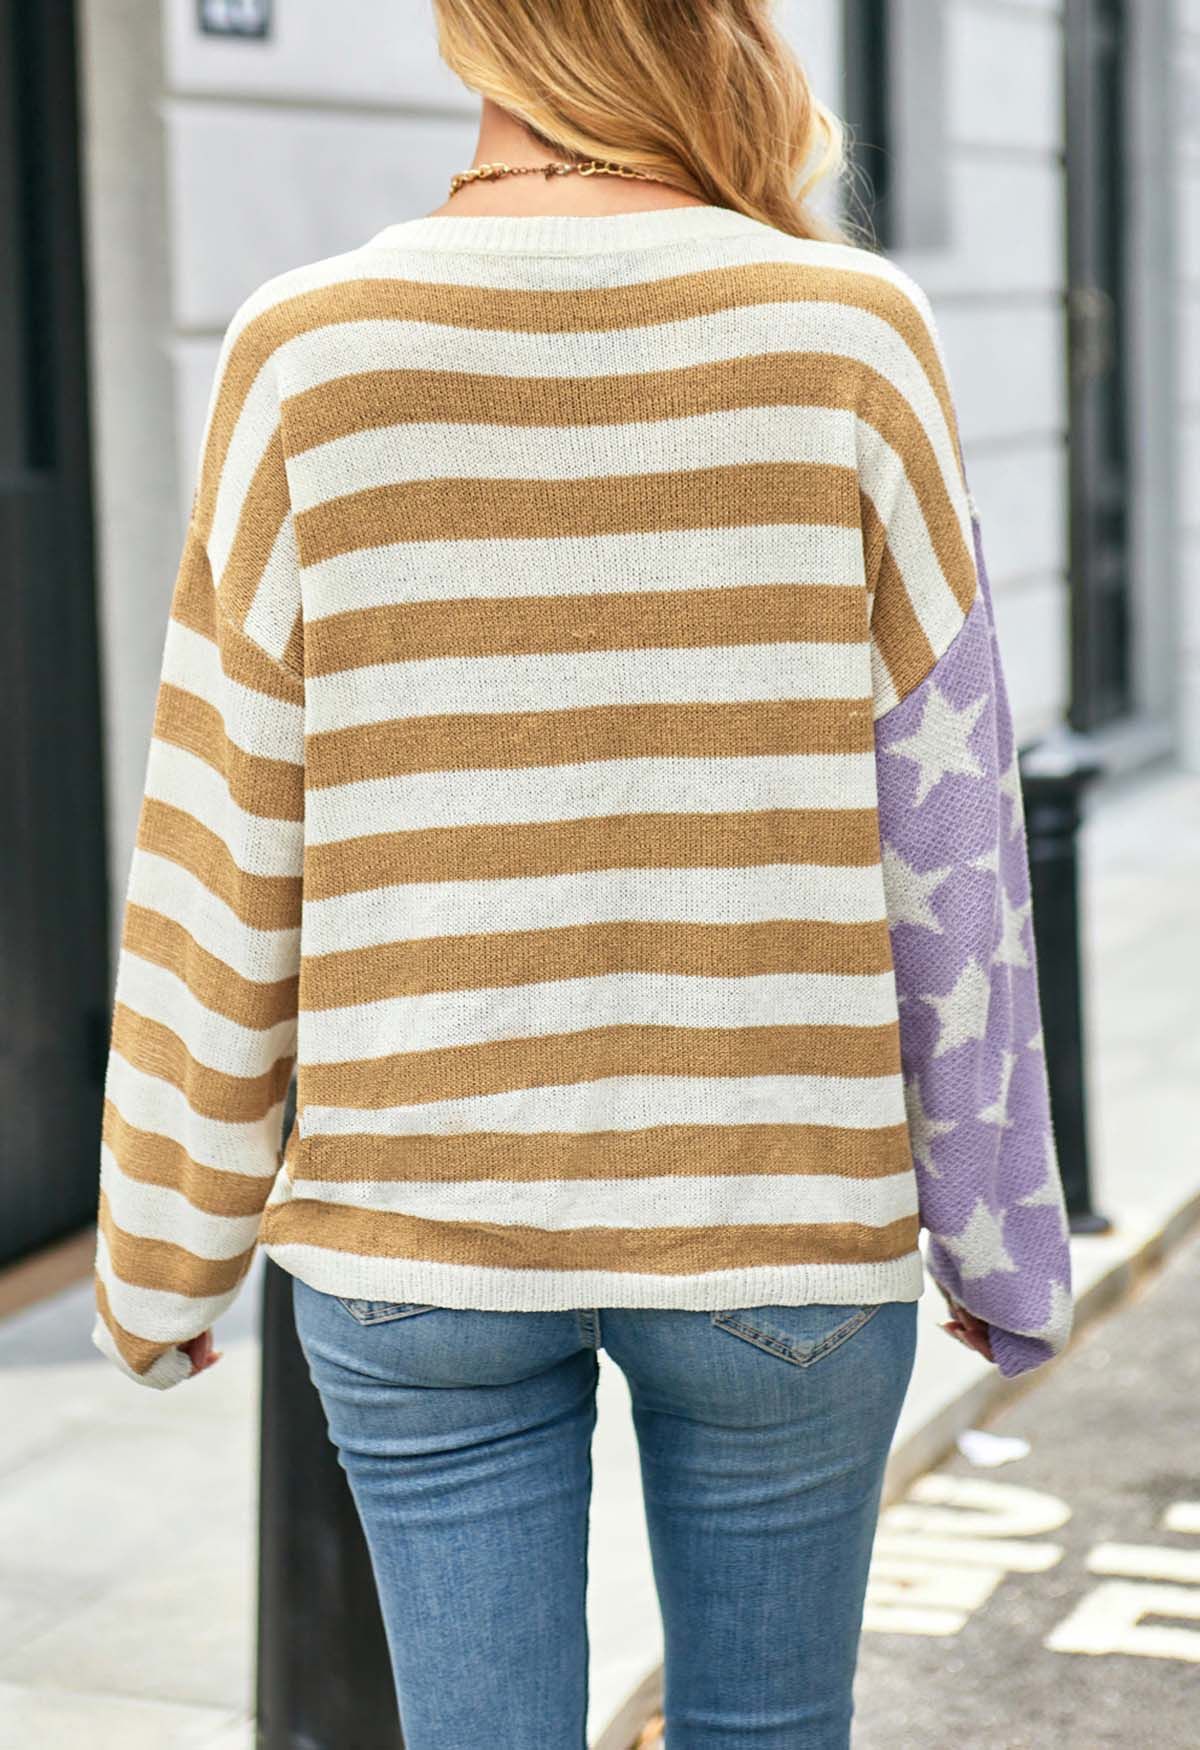 The Stars and The Stripes Printed Knit Sweater in Tan